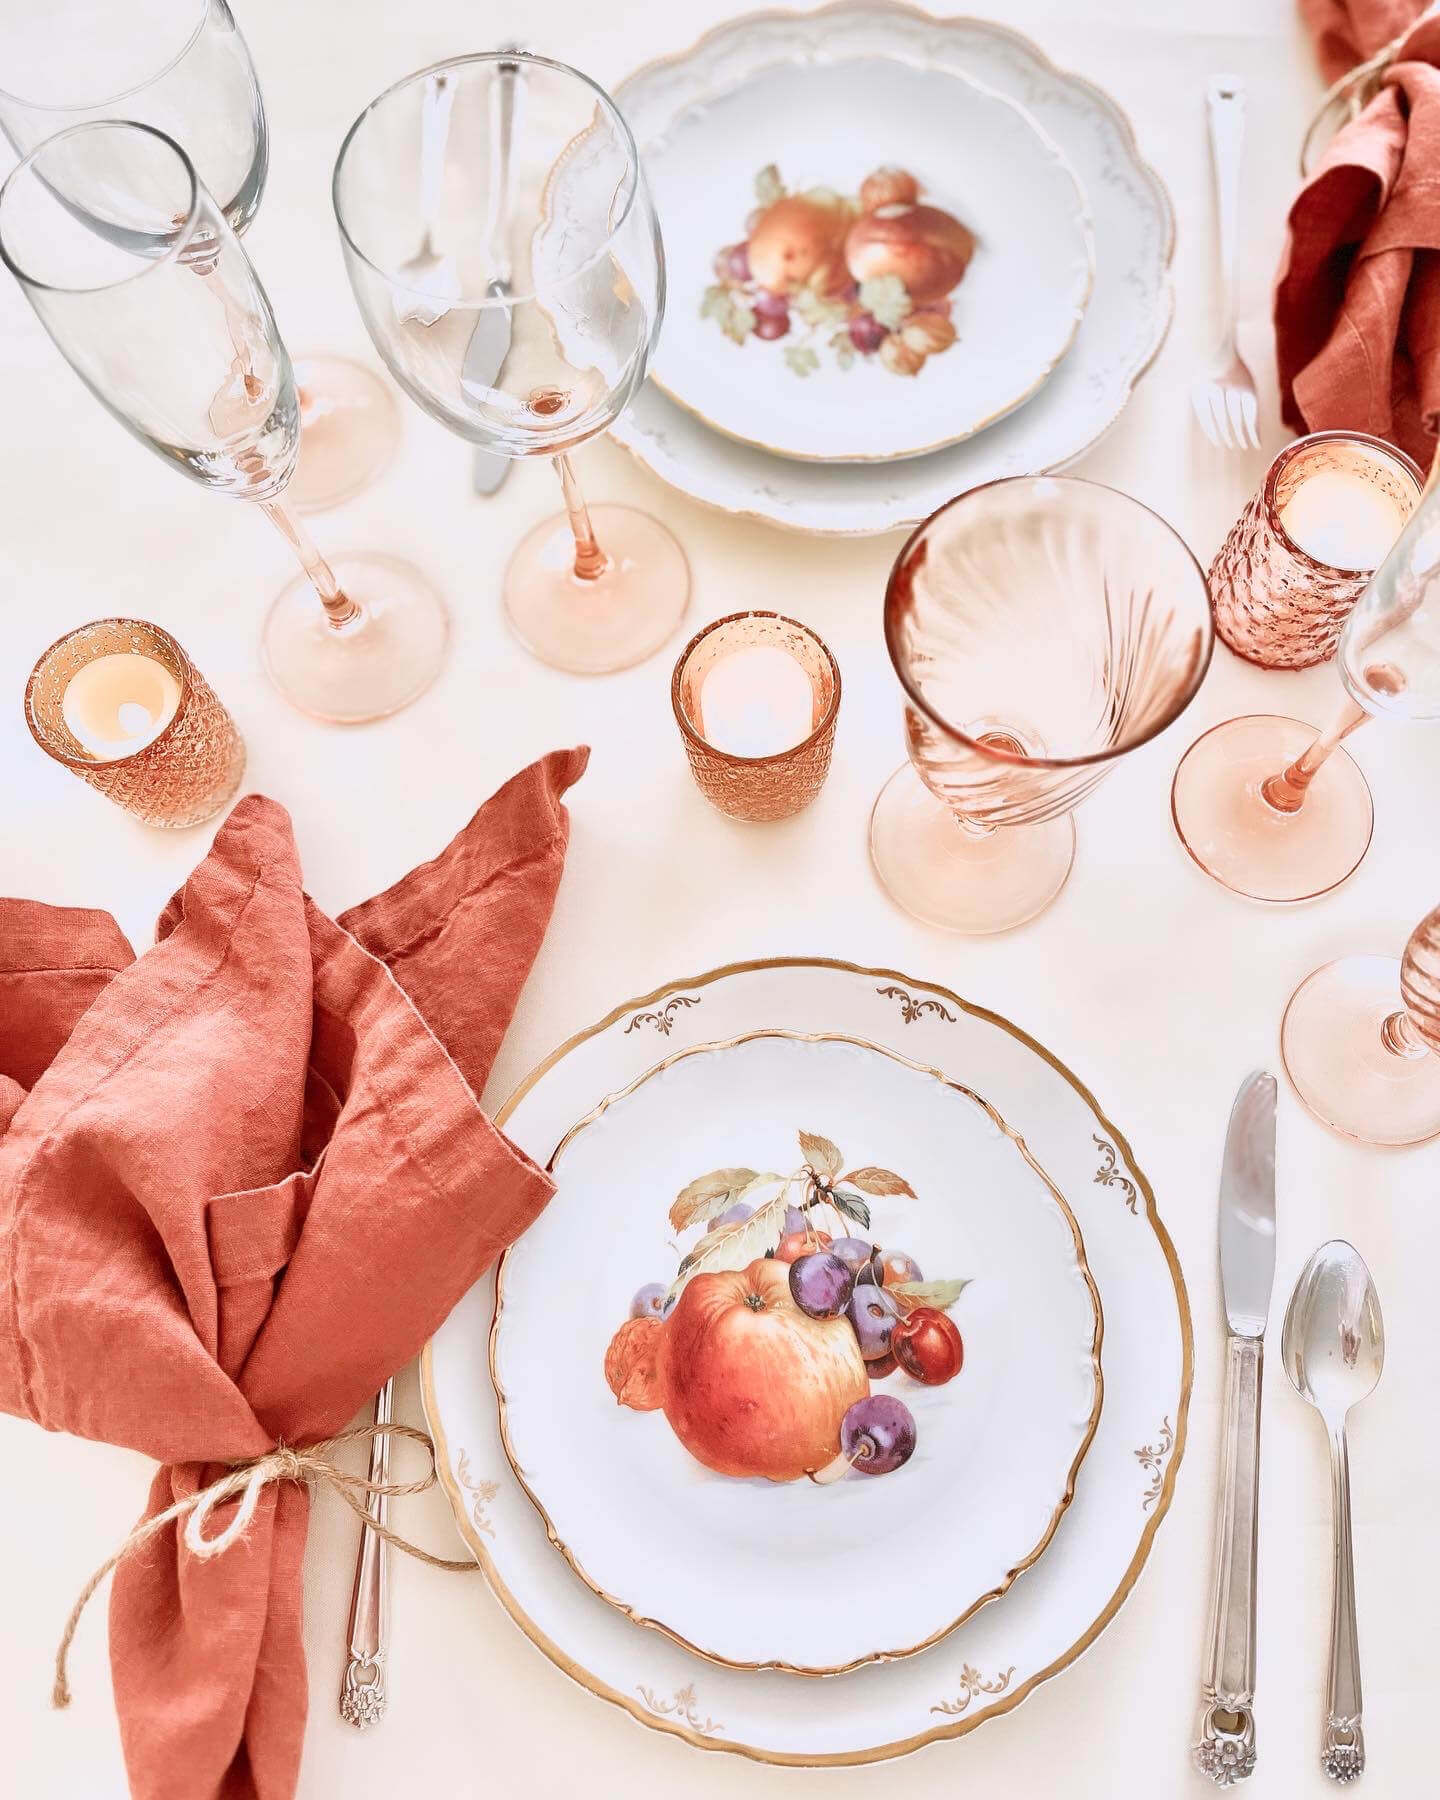 Autumn orchard plates, cinnamon colored linen napkins tied witht string, blush glassware, mercury tealight holders, silver cutlery on a white tablecloth